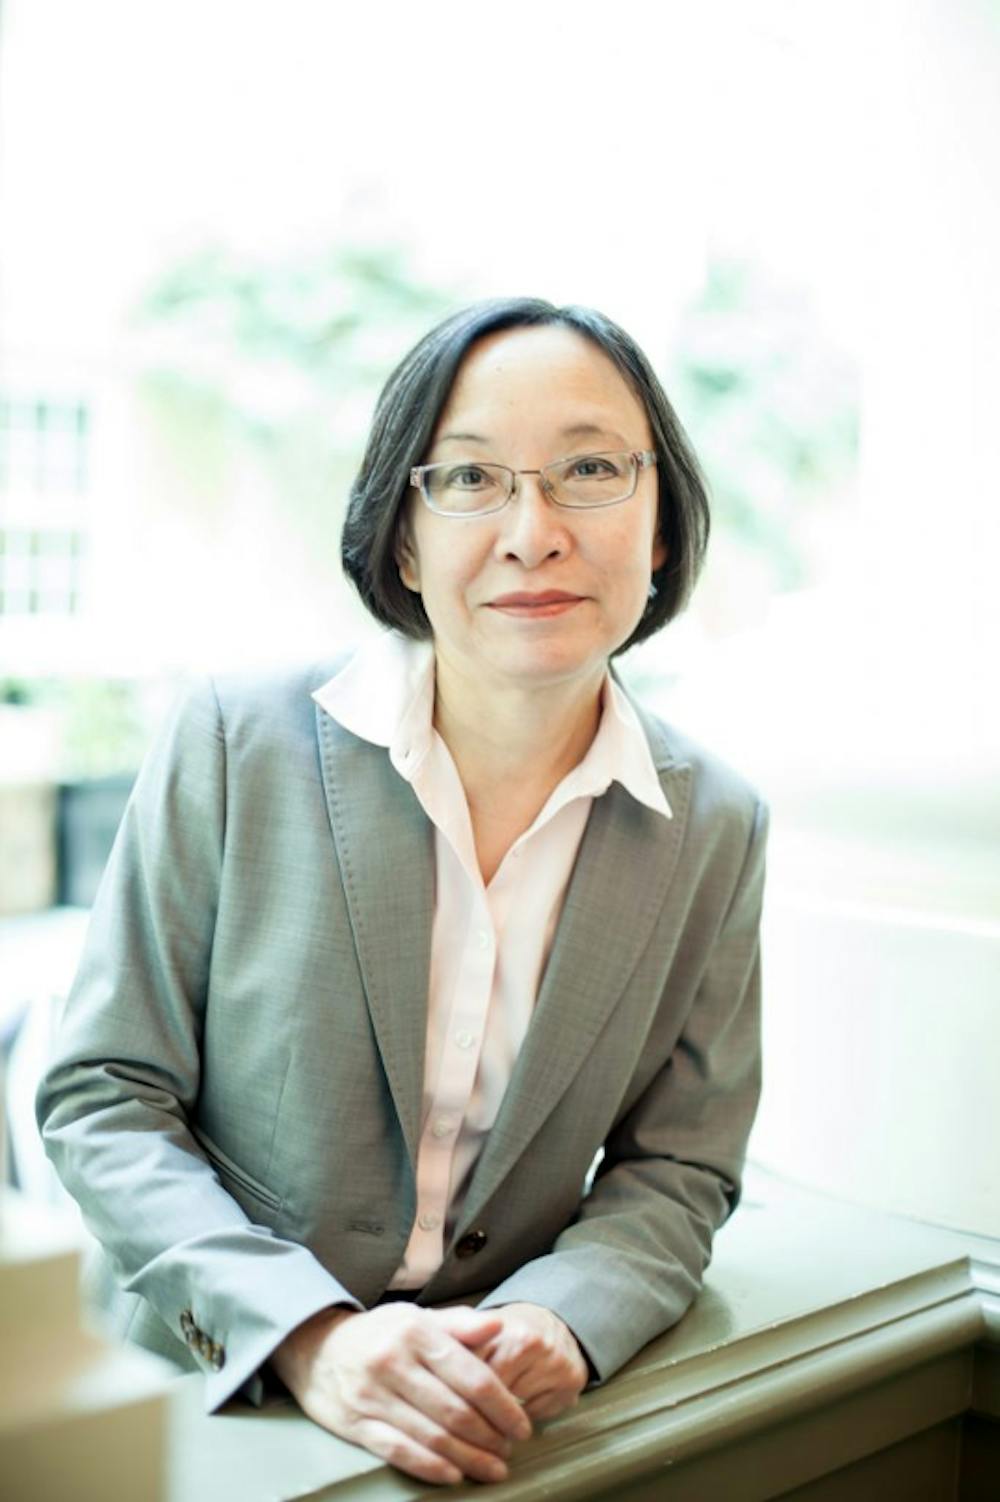 <p>Dr. Jane Wong said there are several expansions planned for the School of Humanities and Social Sciences (Photo courtesy of <a href="https://hss.tcnj.edu/2017/01/30/a-look-back-at-dean-wongs-first-semester-at-tcnj/" target="">tcnj.edu</a>)</p>